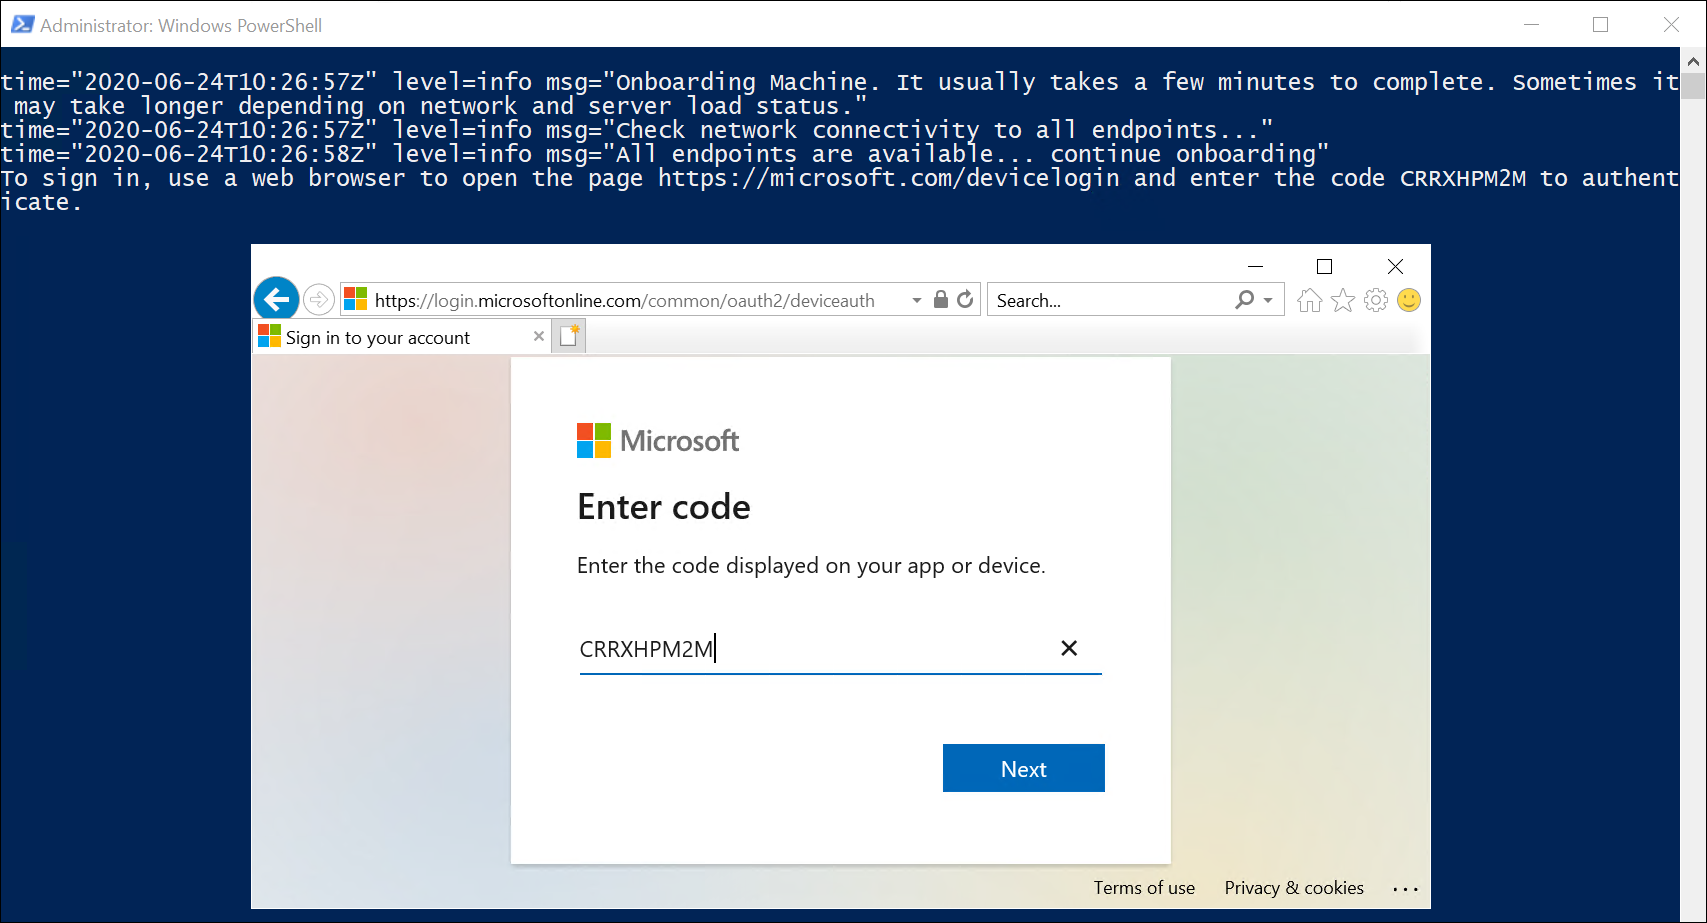 A screenshot of the Administrator: Windows PowerShell window with the installation script running. The administrator is entering a security code to confirm their intention to onboard the machine.